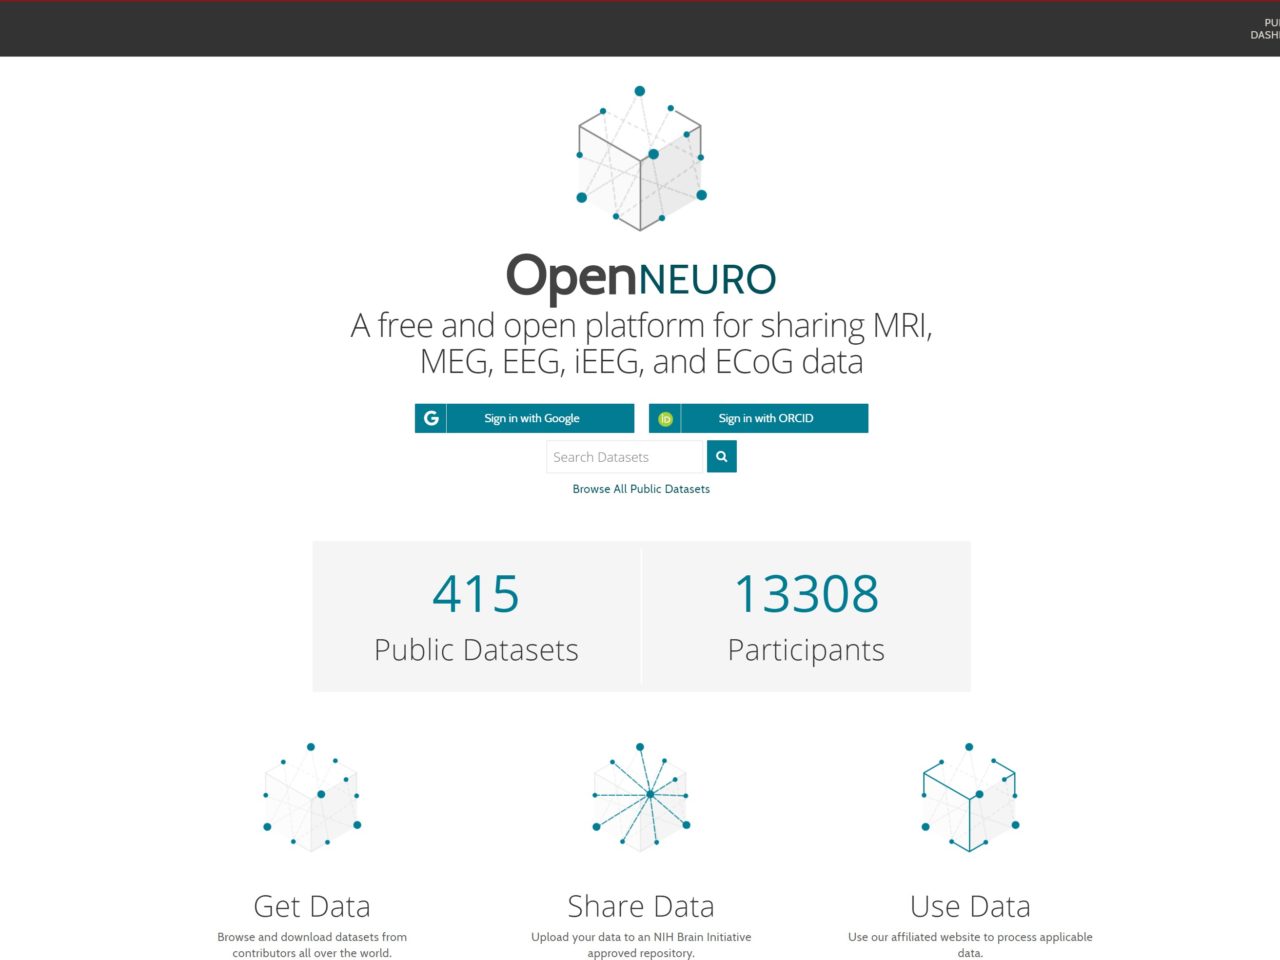 OpenNEURO